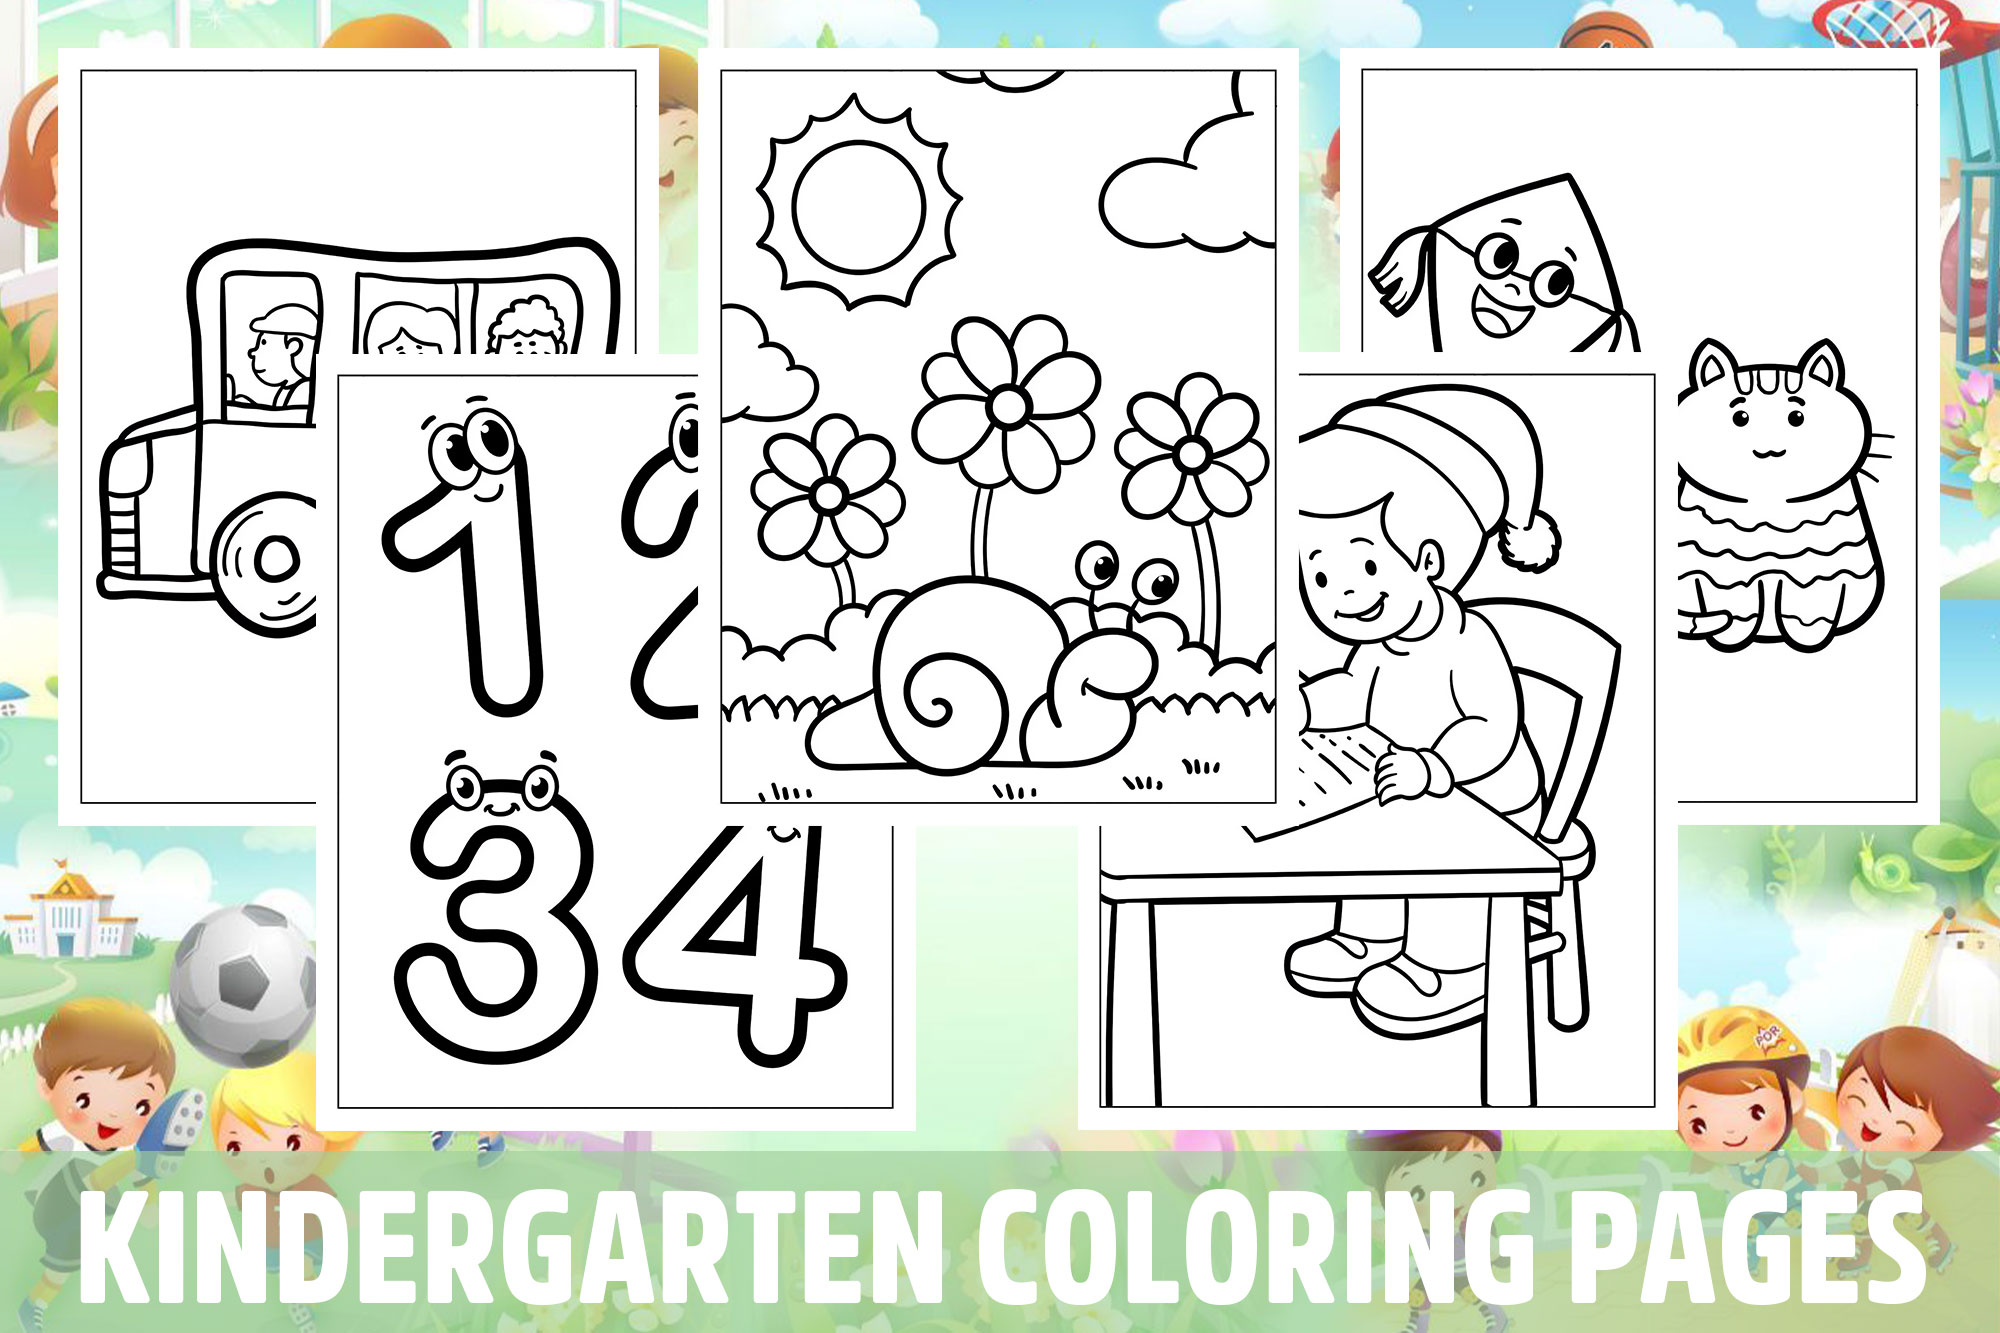 Kindergarten coloring pages for kids girls boys teens birthday school activity made by teachers